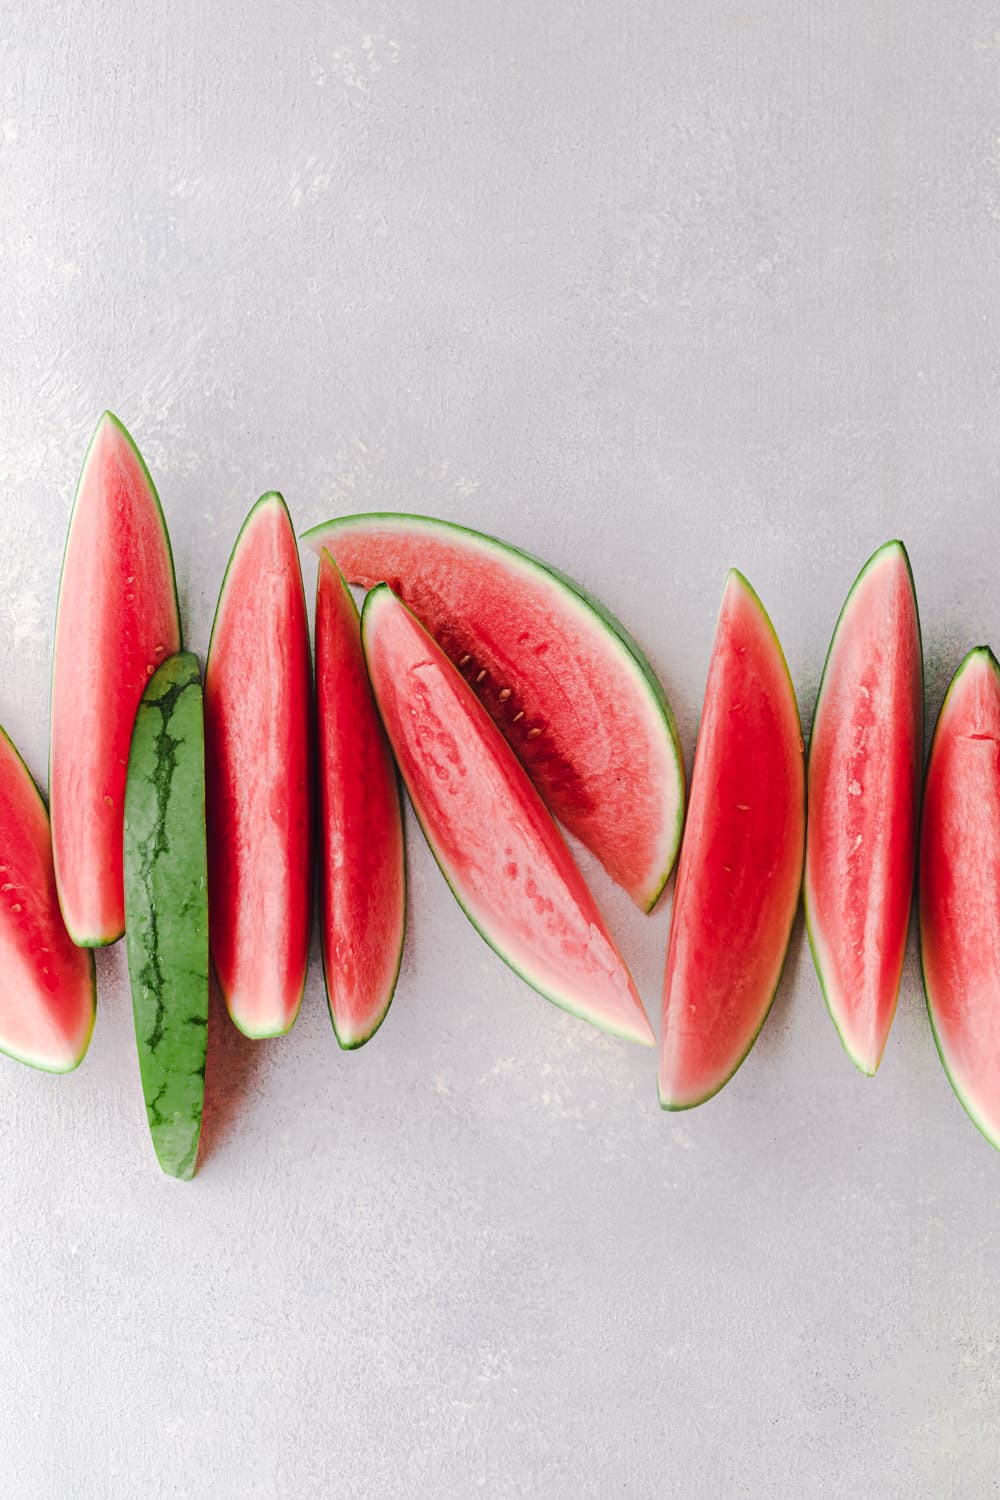 pink watermelon slices on a light background